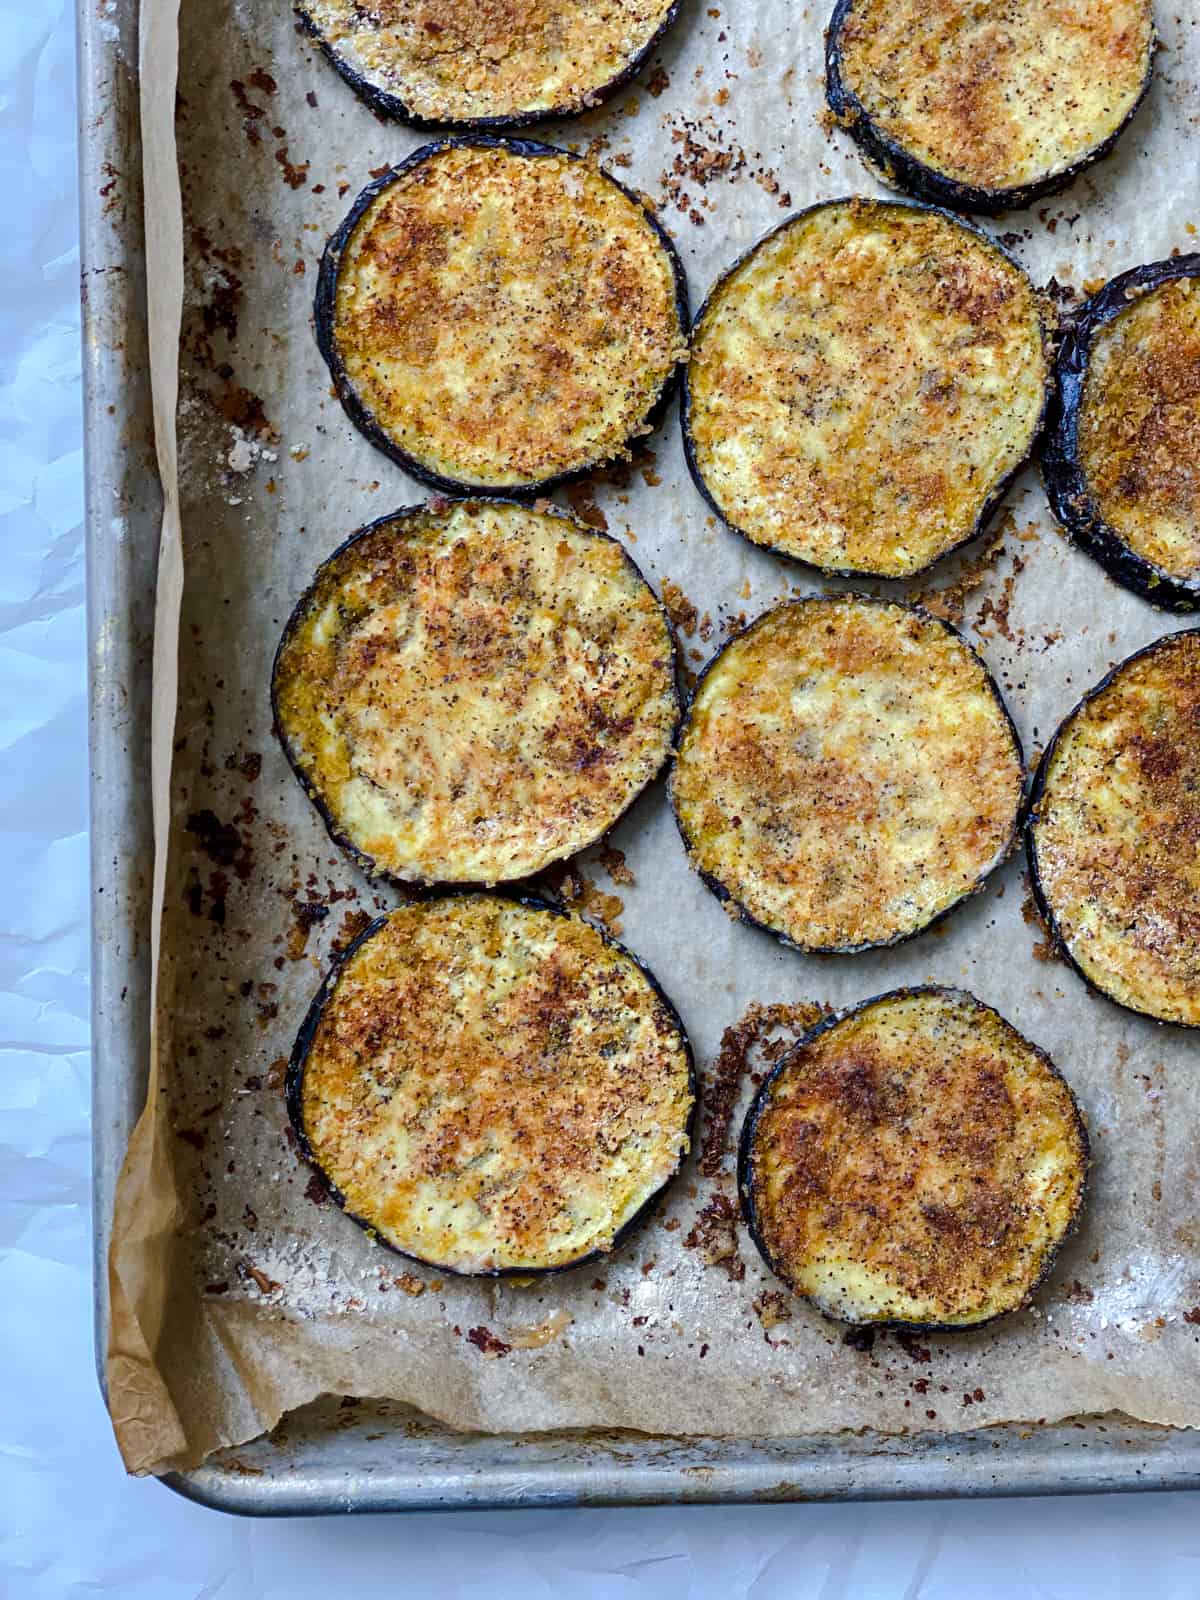 post baked eggplant slices in baking tray